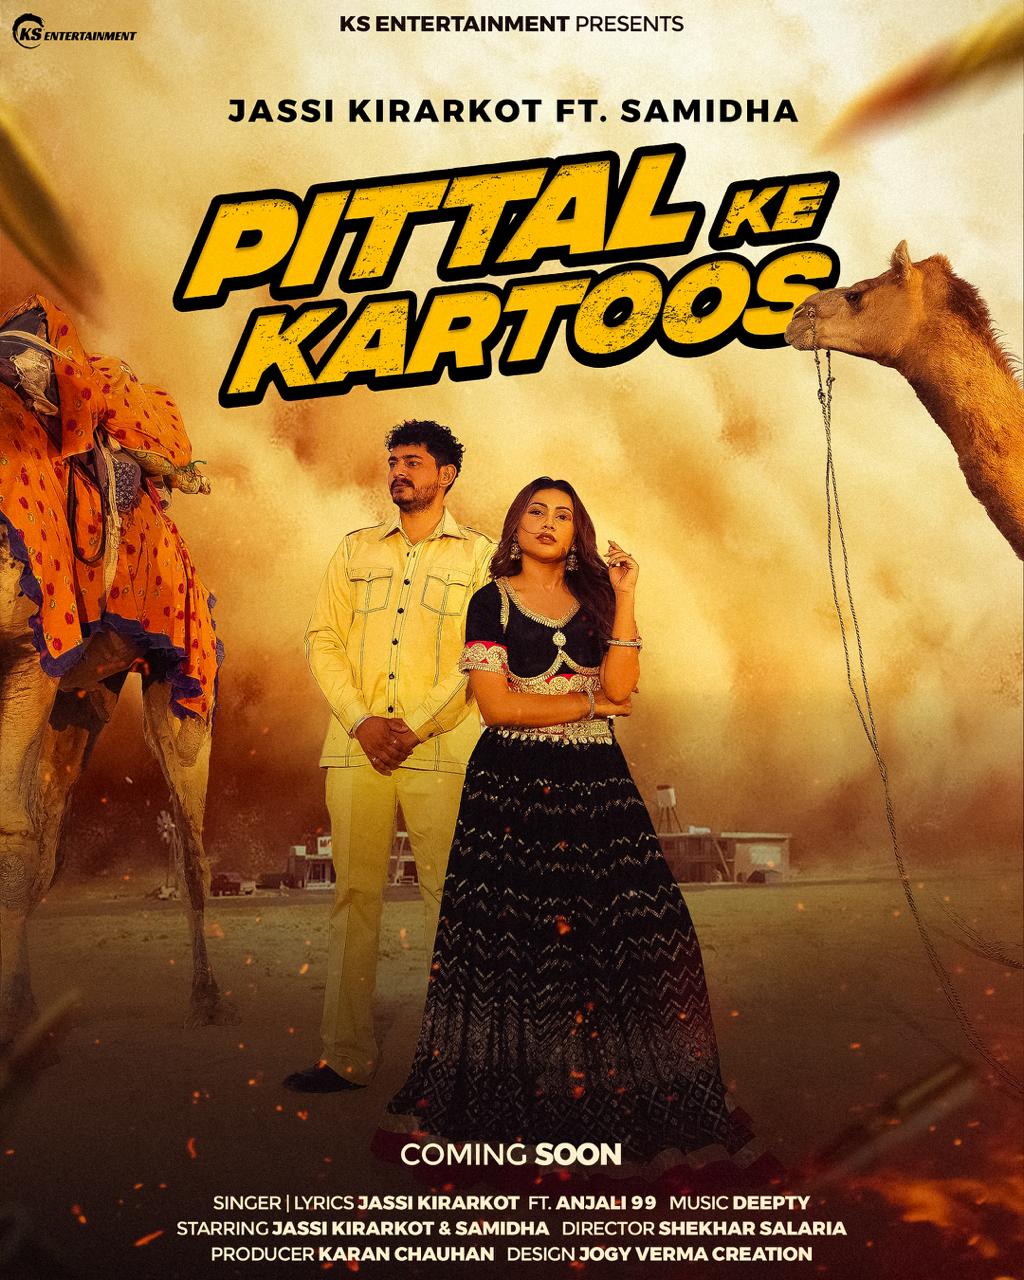 “Pittal Ke Kartoos” is a chart-topping song featuring Samidha in an elegant traditional look.